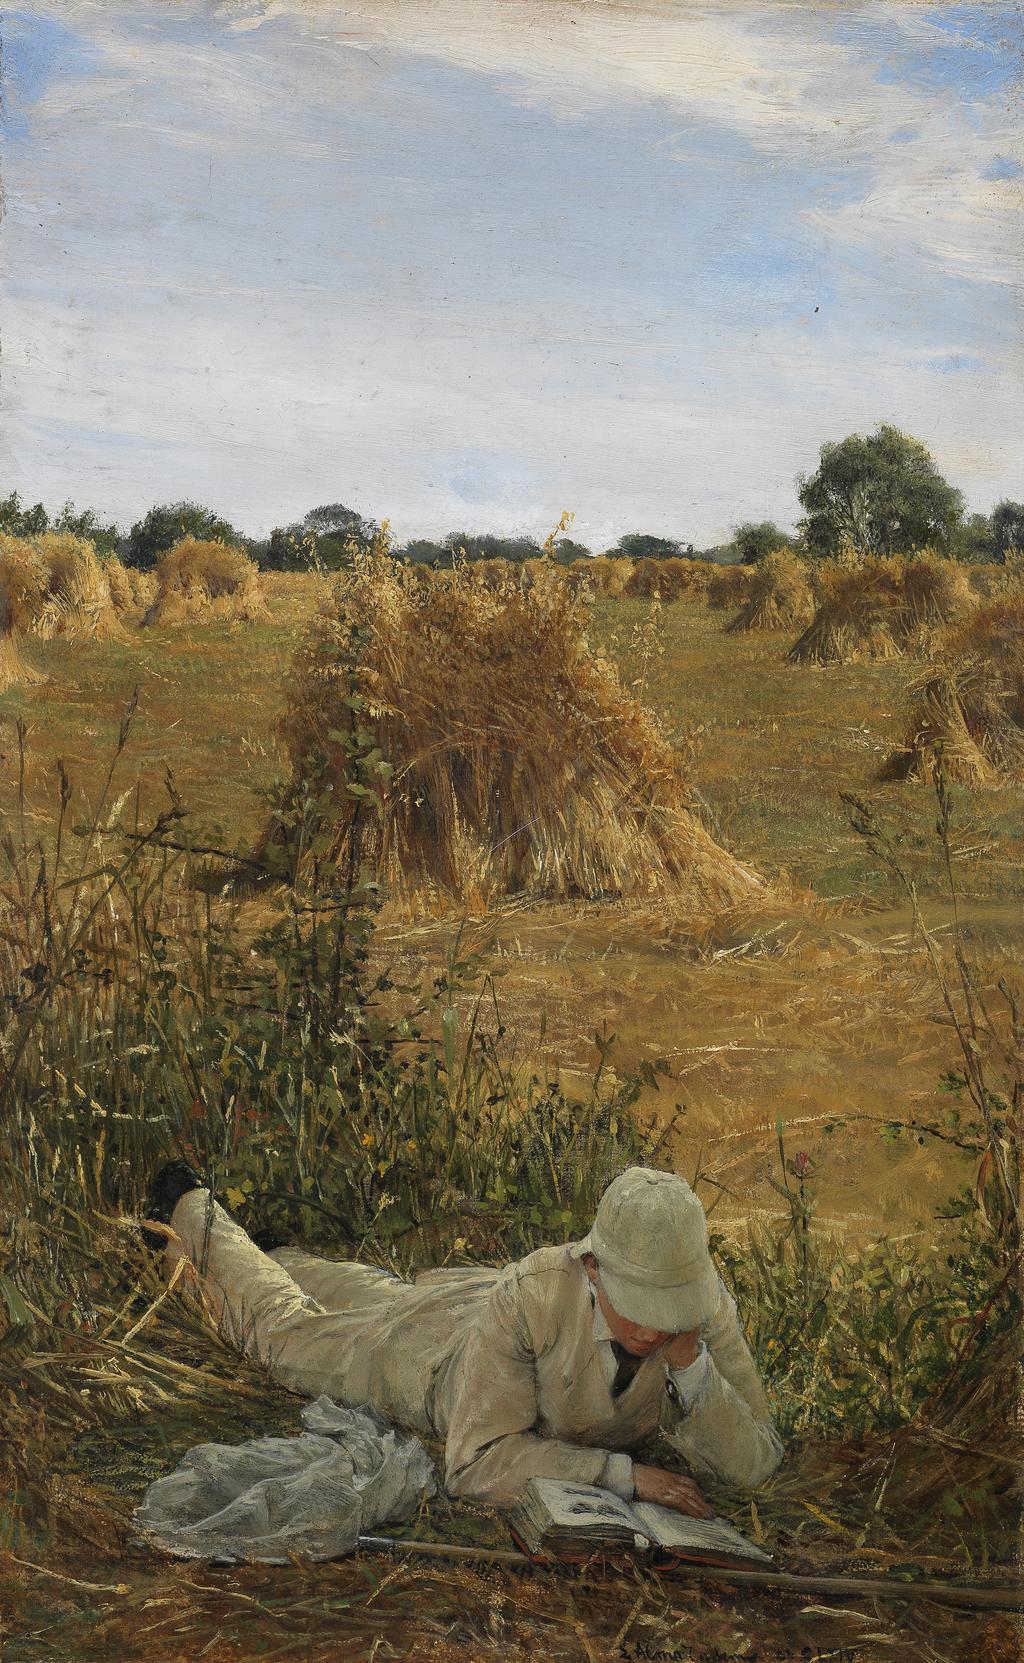 An image of 94 Degrees in the Shade. Alma-Tadema, Lawrence (British, 1836-1912). Oil on canvas laid down on panel, height 35.3 cm, width 21.6 cm, 1876. Notes: The scene shows a cornfield at Godstone, Surrey, with the donor, at that date aged seventeen, lying in the foreground.